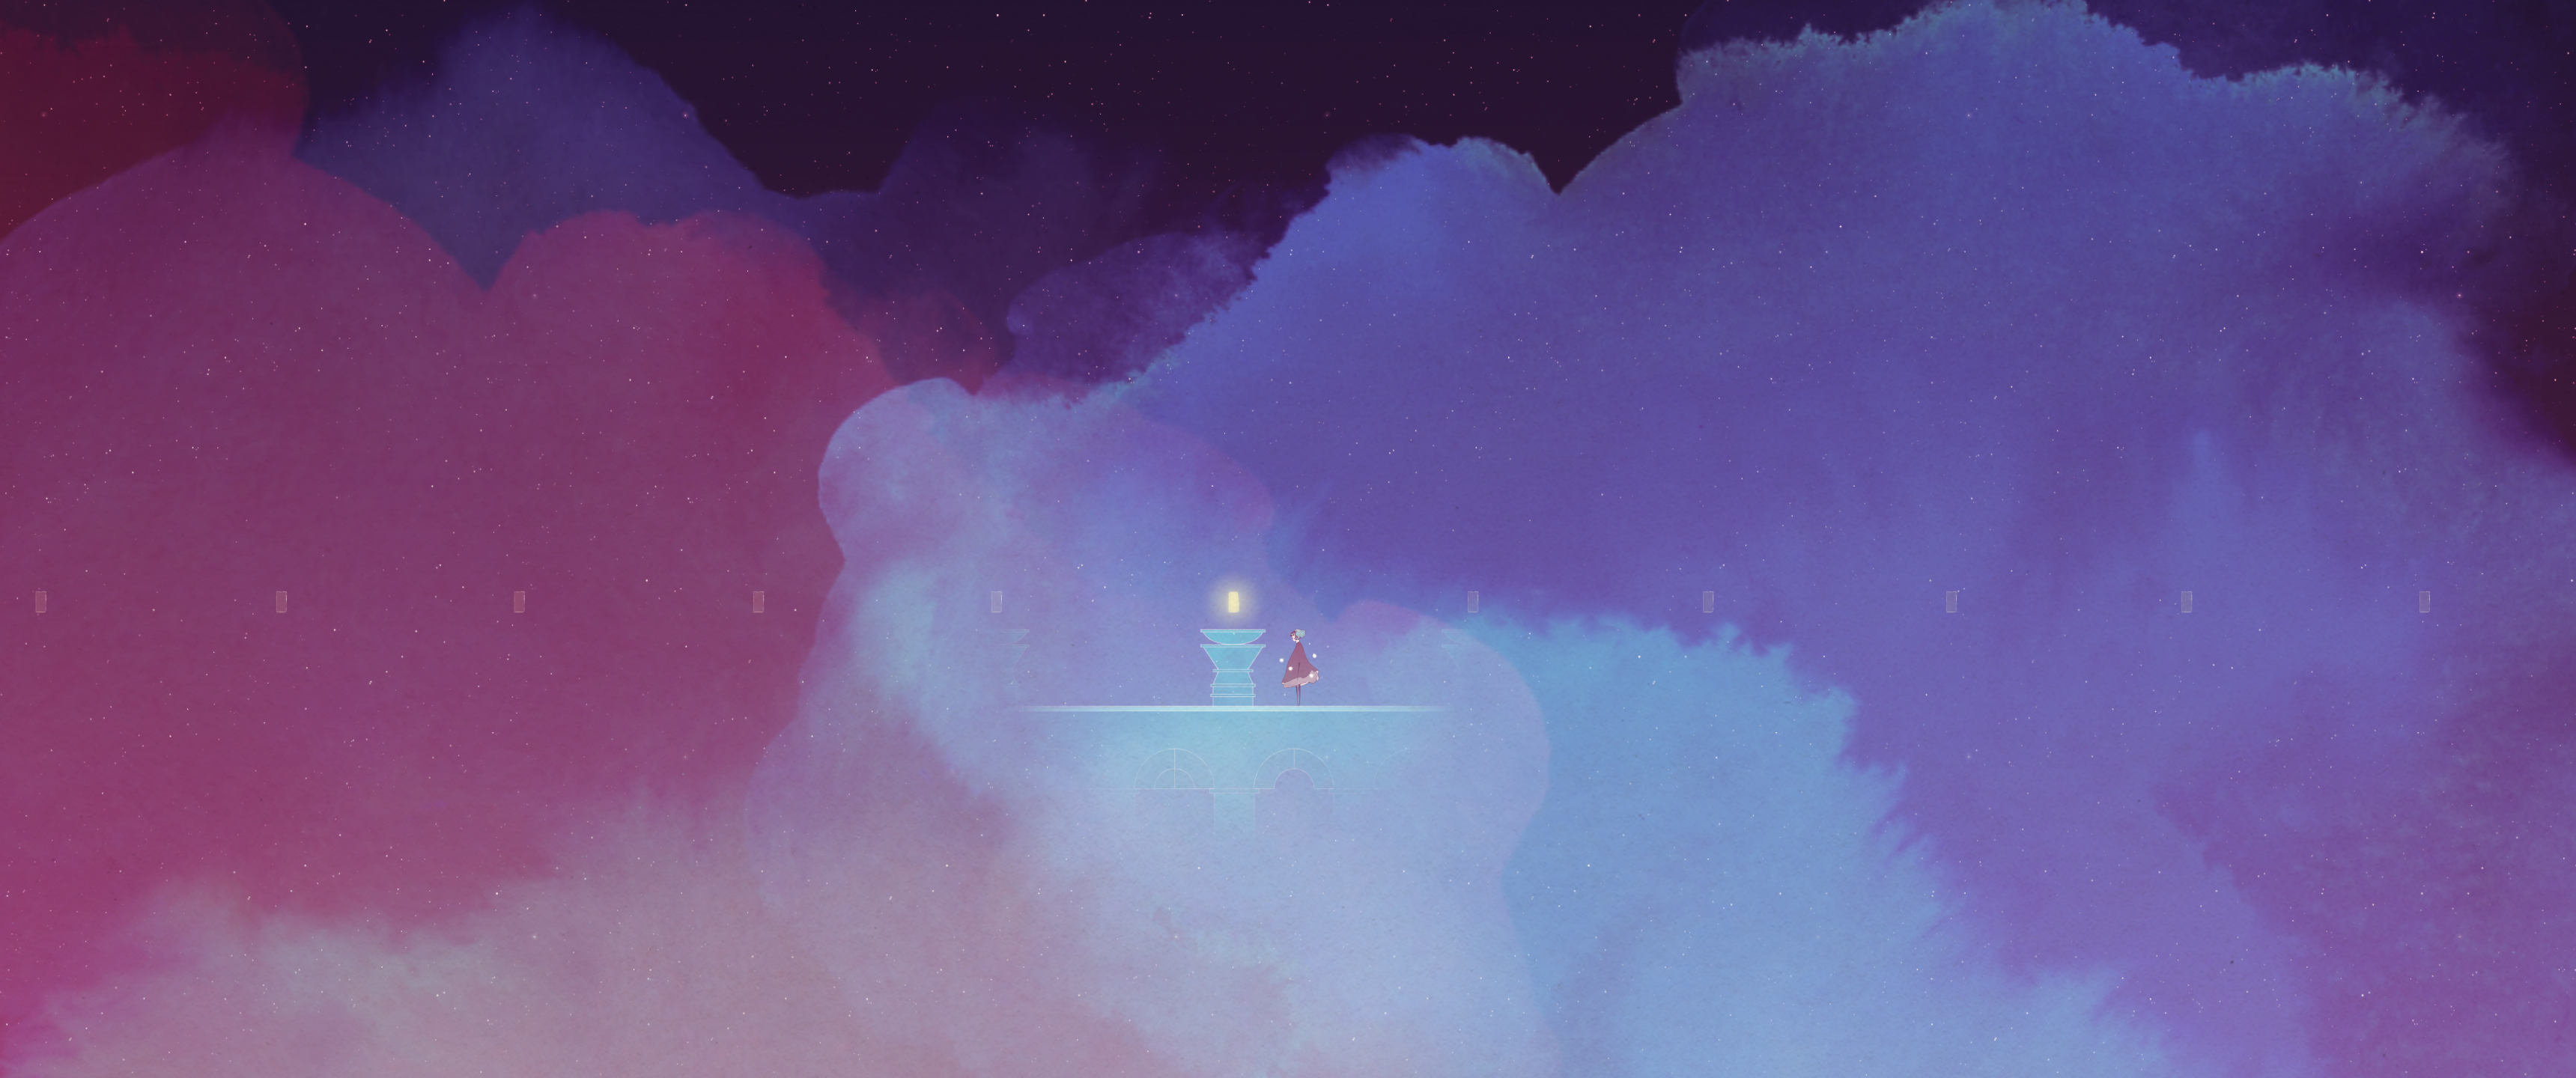 Perfect little game called GRIS [3440x144] : WidescreenWallpapers